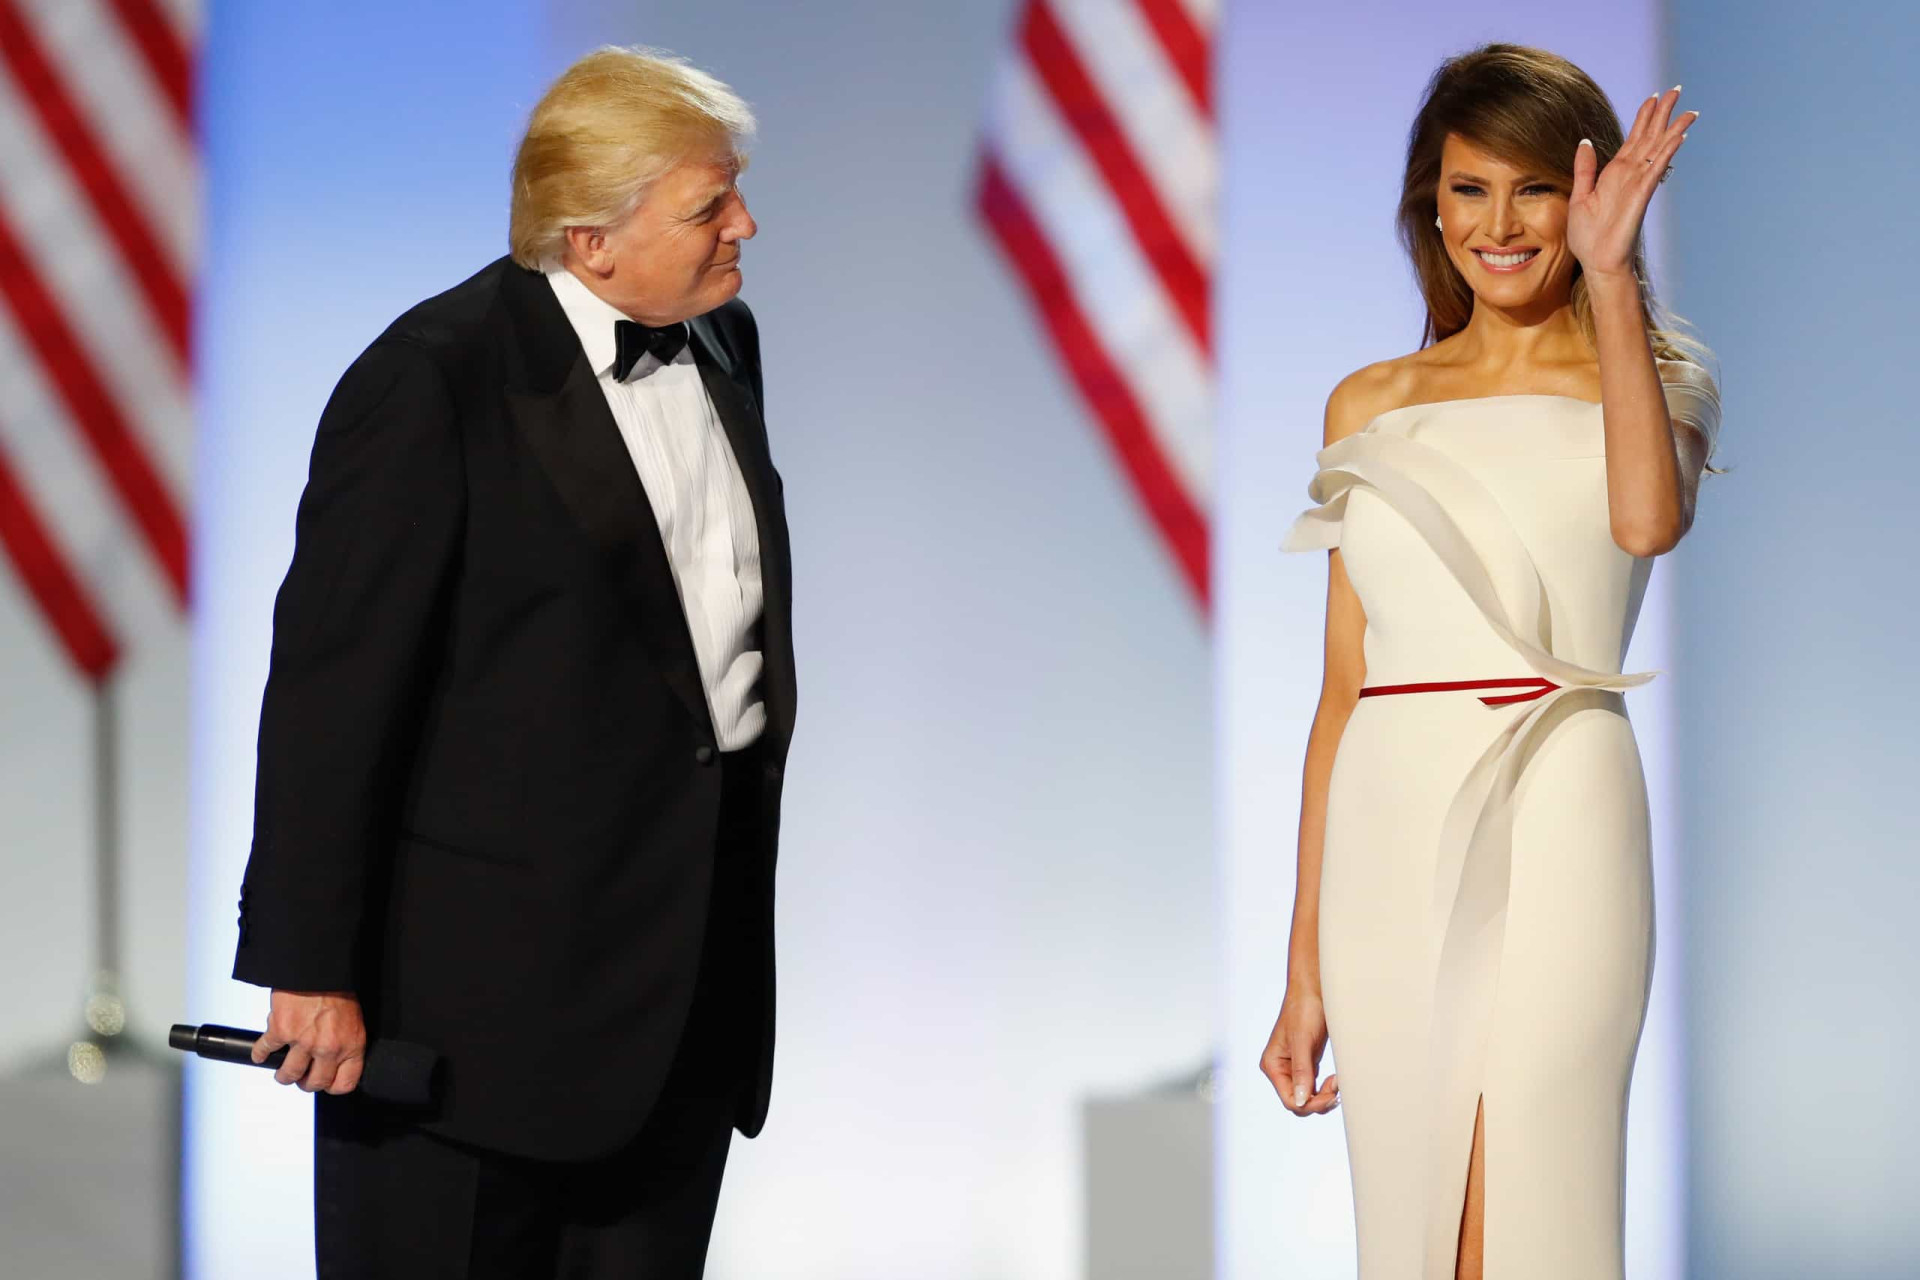 <p>First Ladies can accept designer dresses as gifts, as long as they donate them afterwards. For example, both Melania Trump and Michelle Obama donated theirs to the Smithsonian.</p><p>You may also like:<a href="https://www.starsinsider.com/n/341735?utm_source=msn.com&utm_medium=display&utm_campaign=referral_description&utm_content=465881v2en-us"> The surprising ages these stars lost their virginity</a></p>